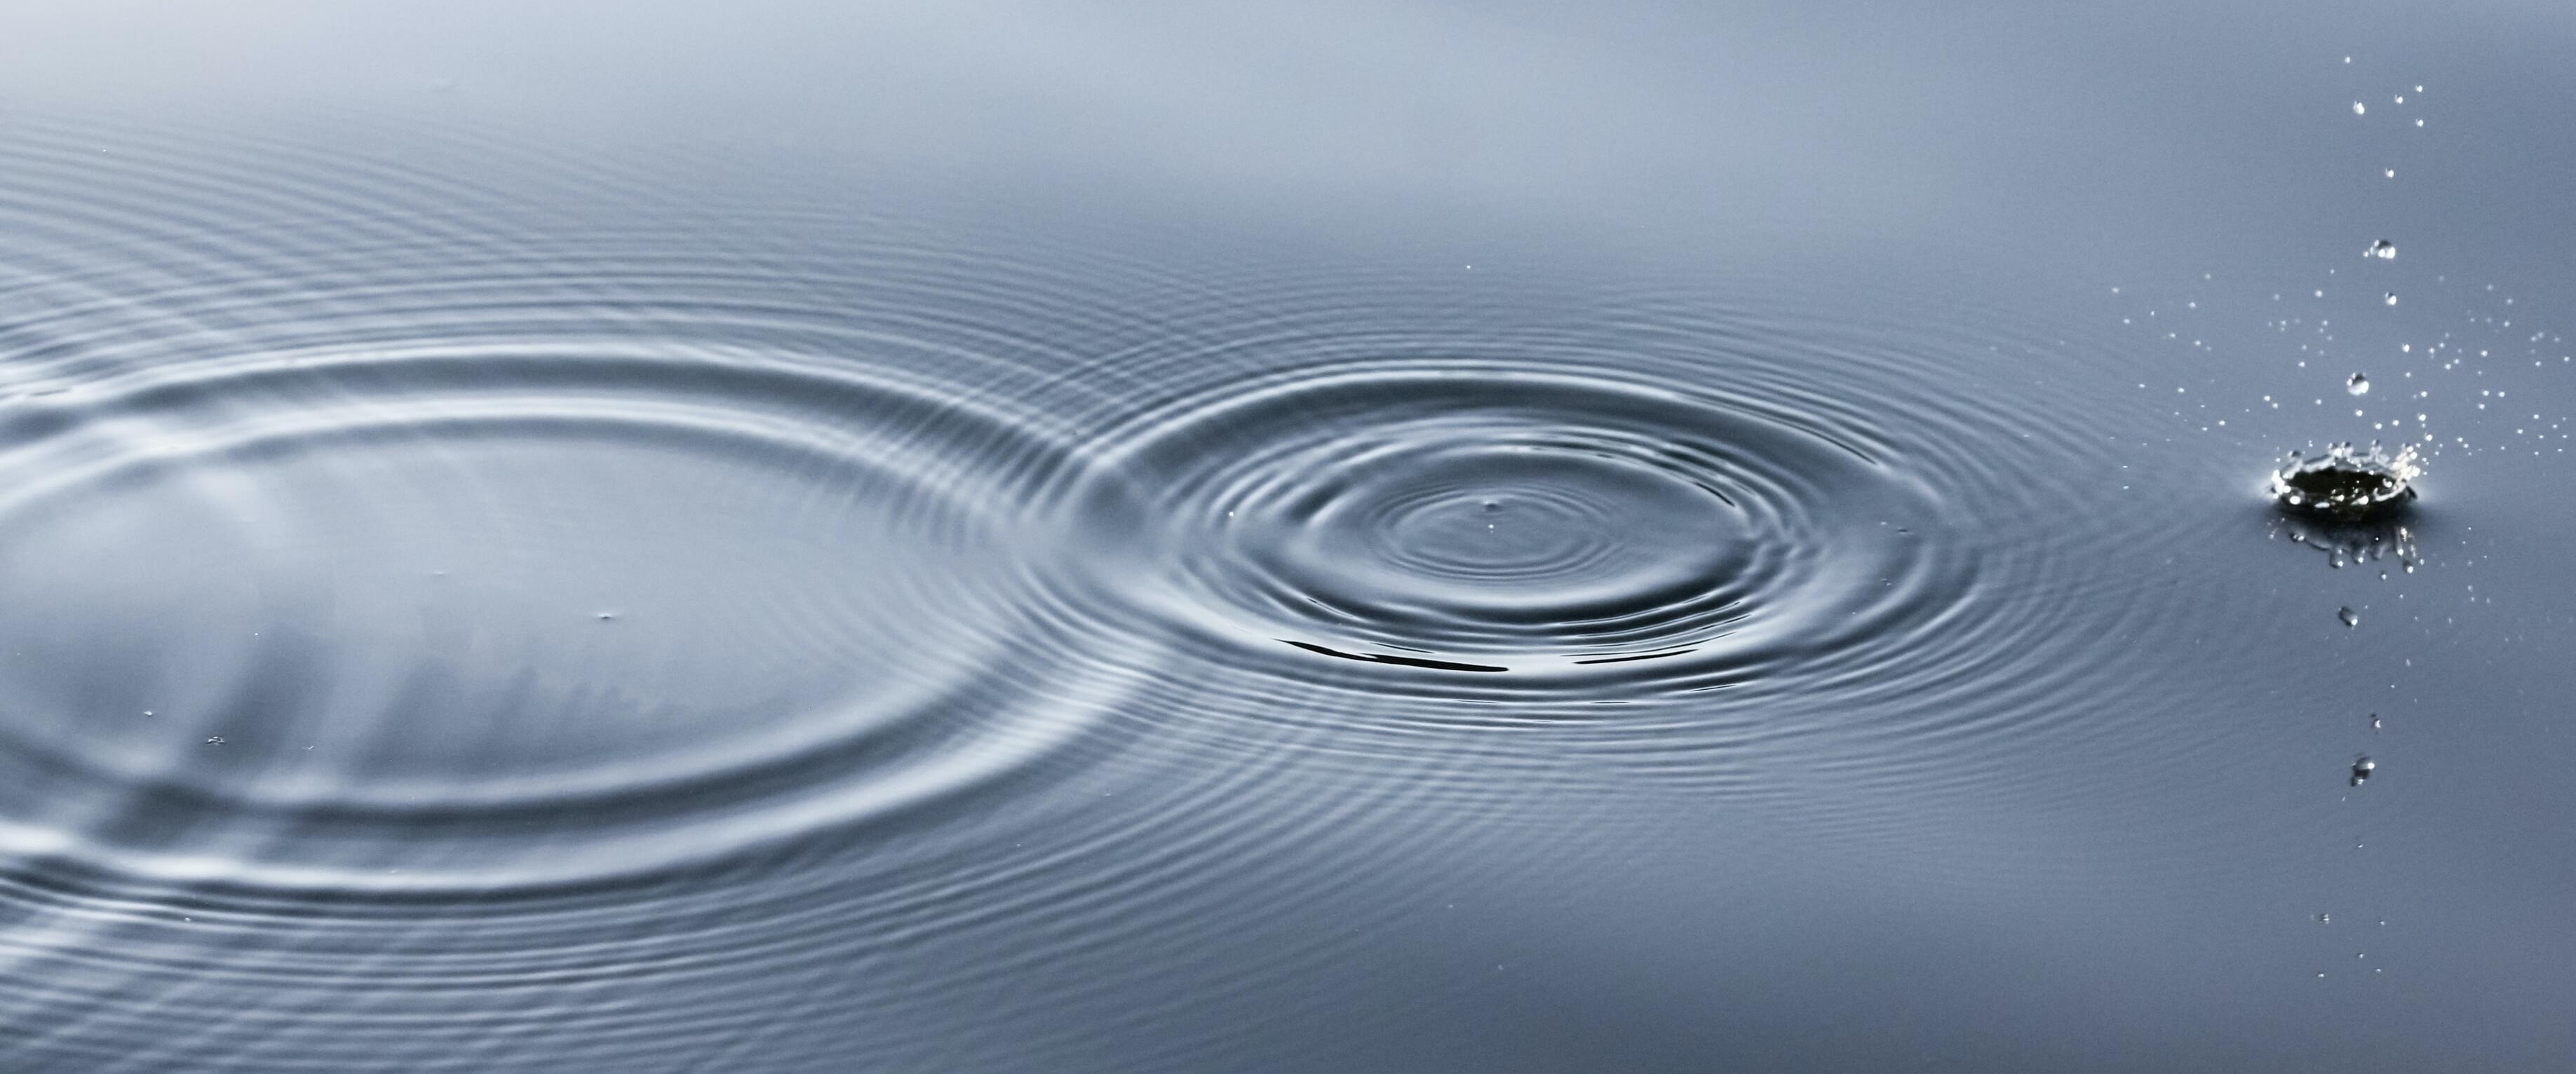 The ripple effect in clear waters.